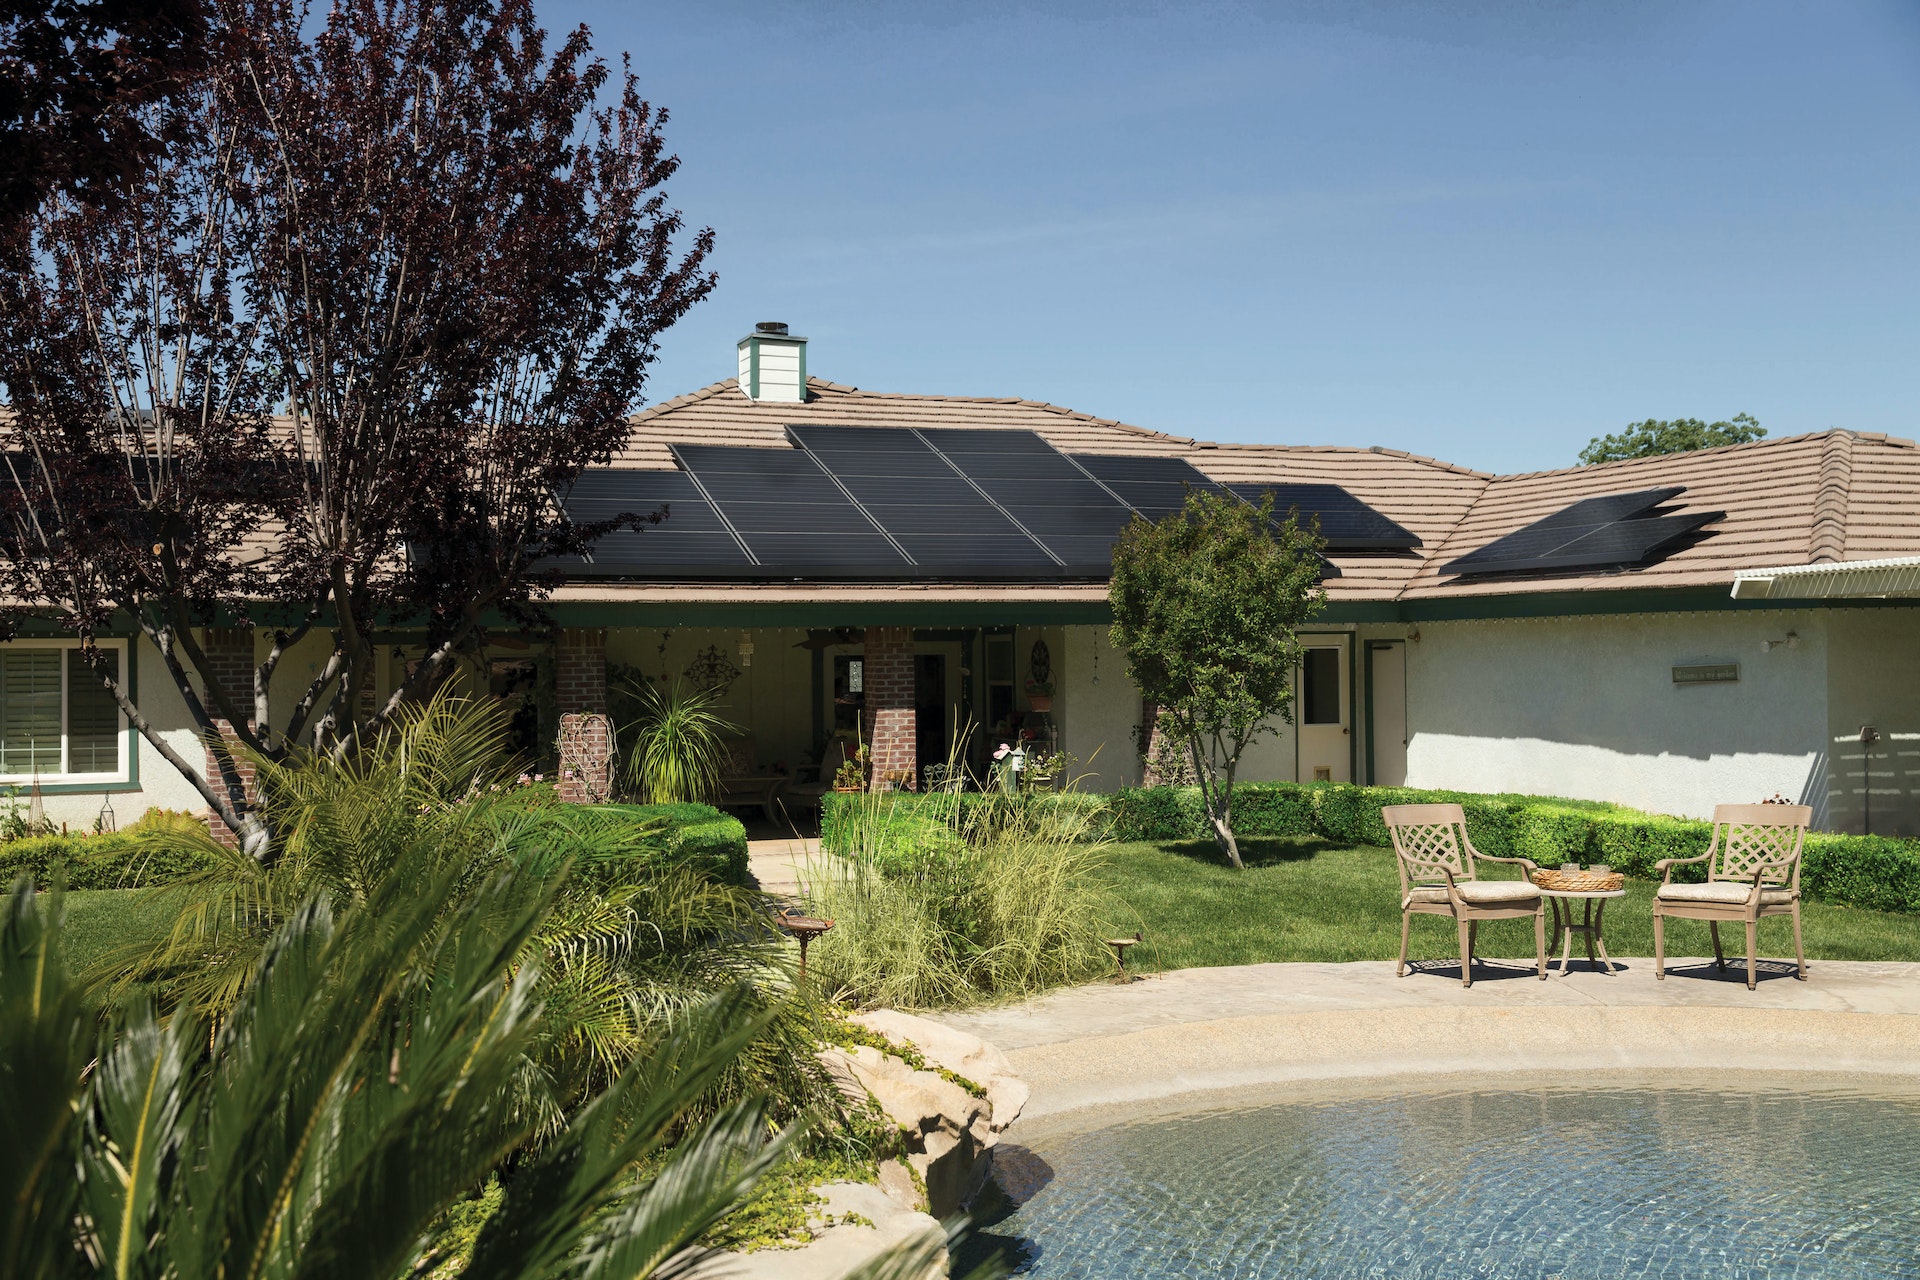 The Cost of Solar Panels – Is It Worth It?